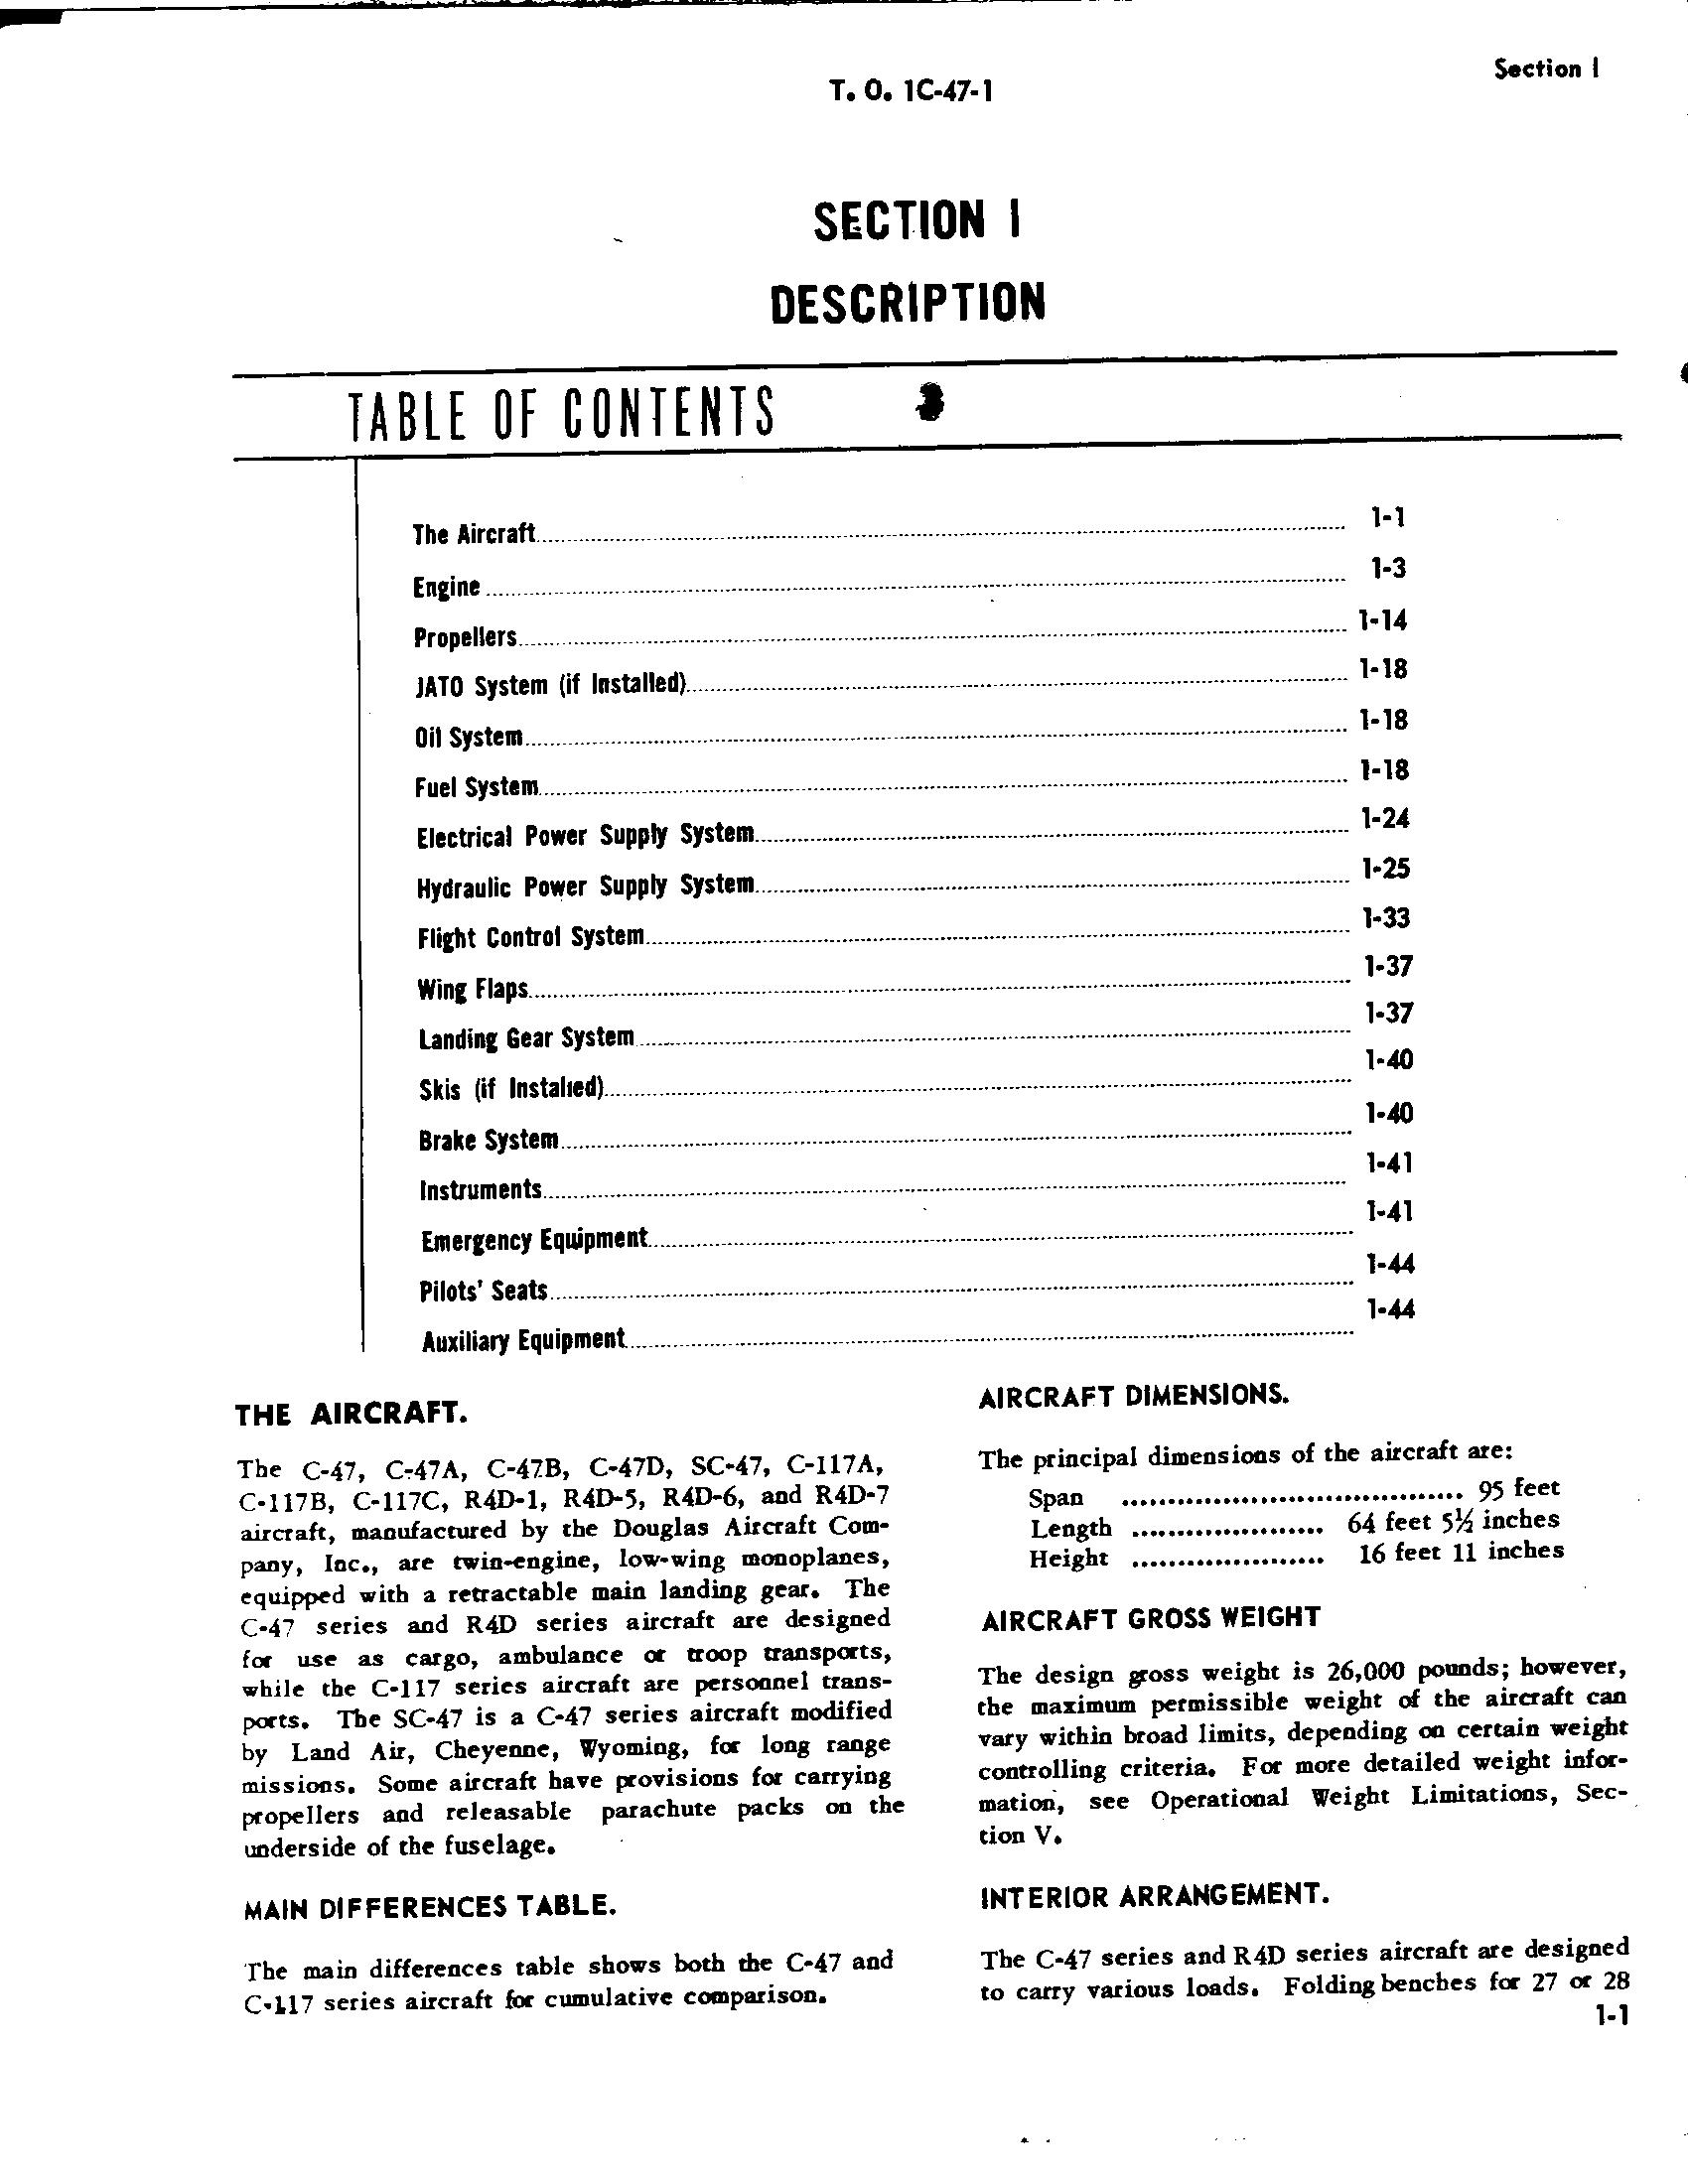 Sample page 7 from AirCorps Library document: Flight Manual for C-47, HC-47, C-117, R4D, and TC-47